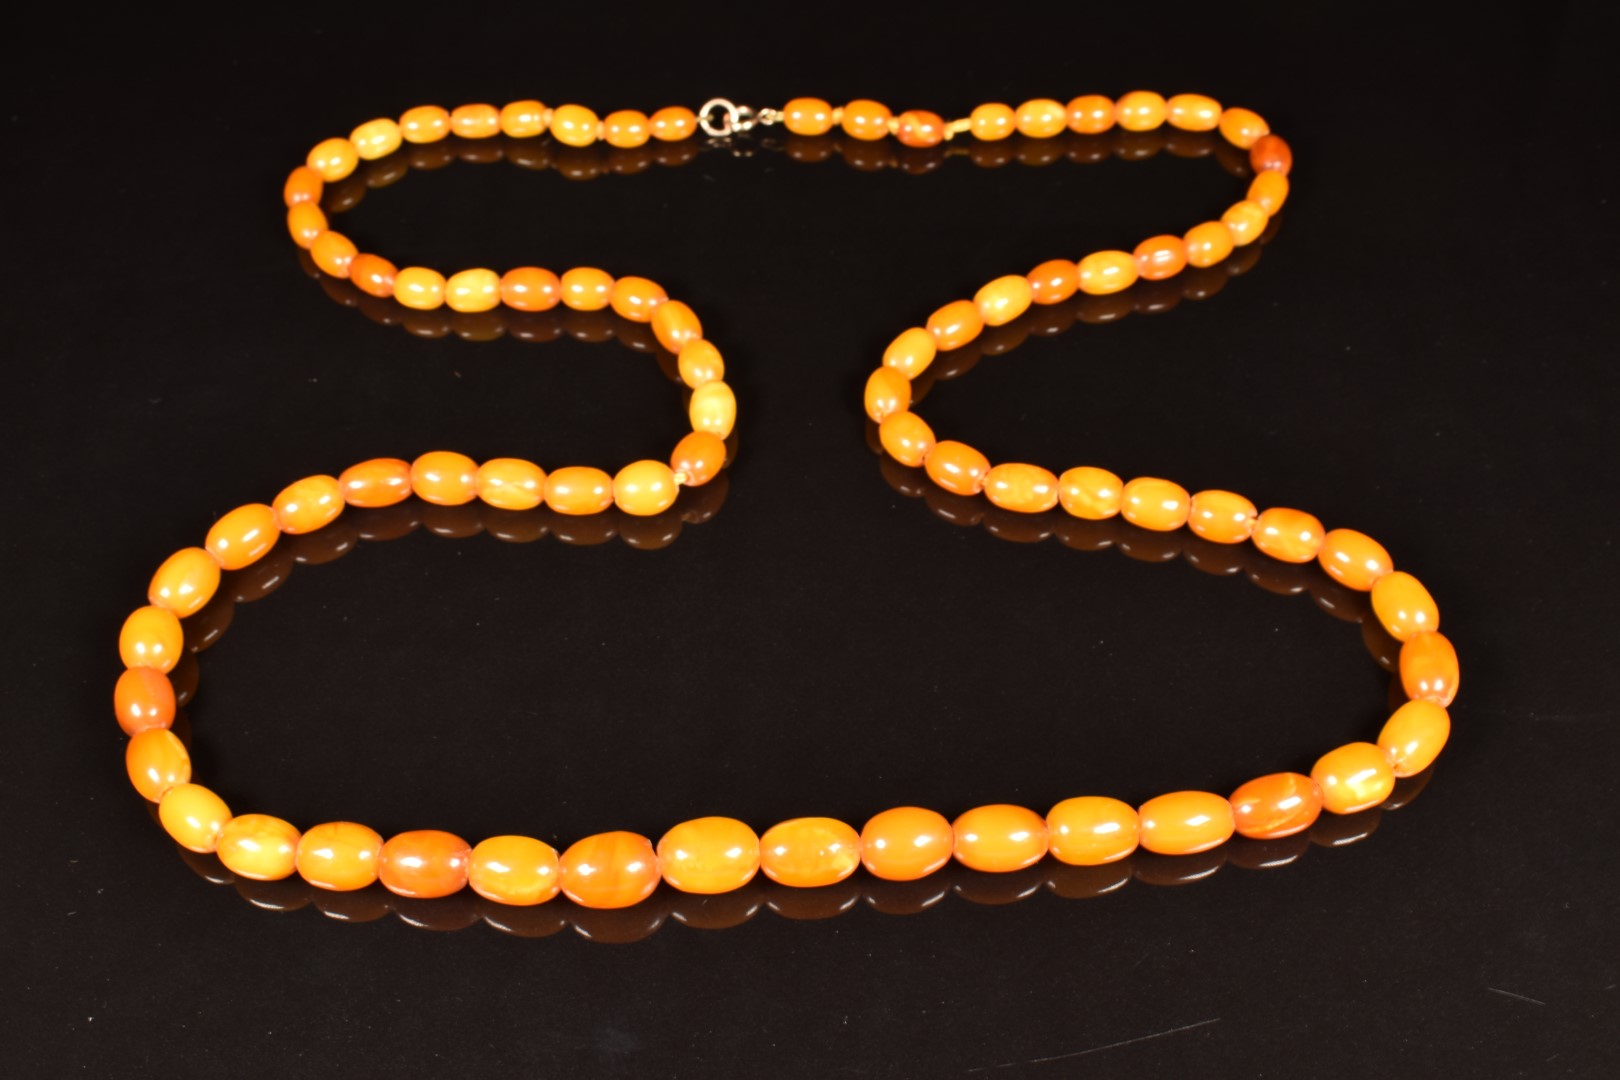 Baltic amber necklace made up of 77 beads, the largest 10 x 13mm, 30g